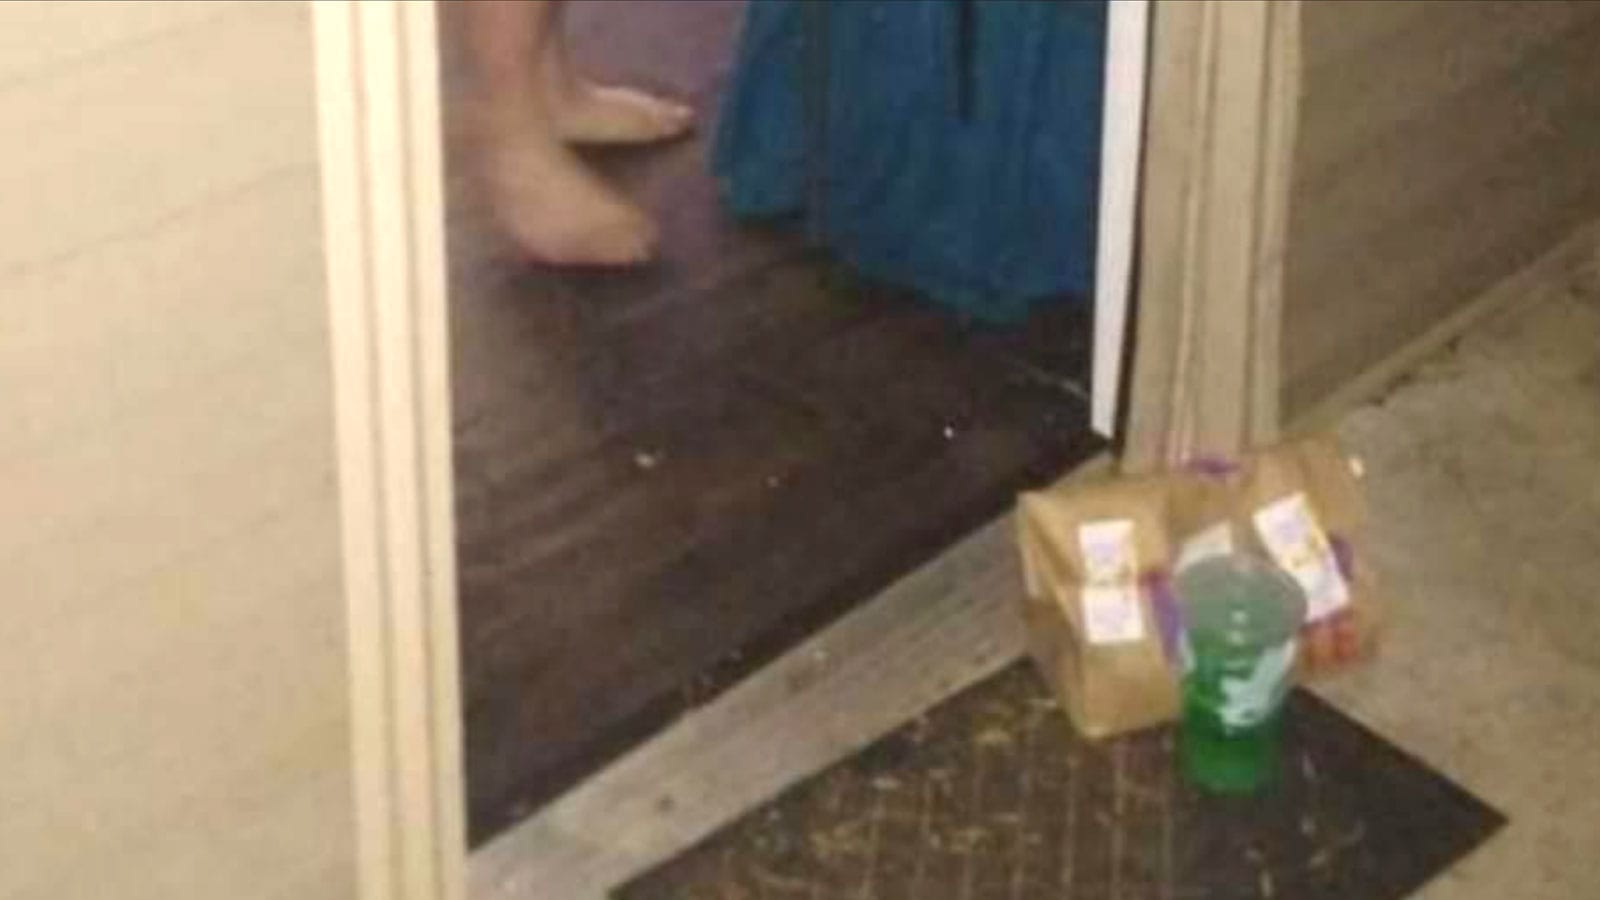 A doorstep, the door open, and bare feet visible. On the doormat, a paper delivery bag and a large plastic drink cup